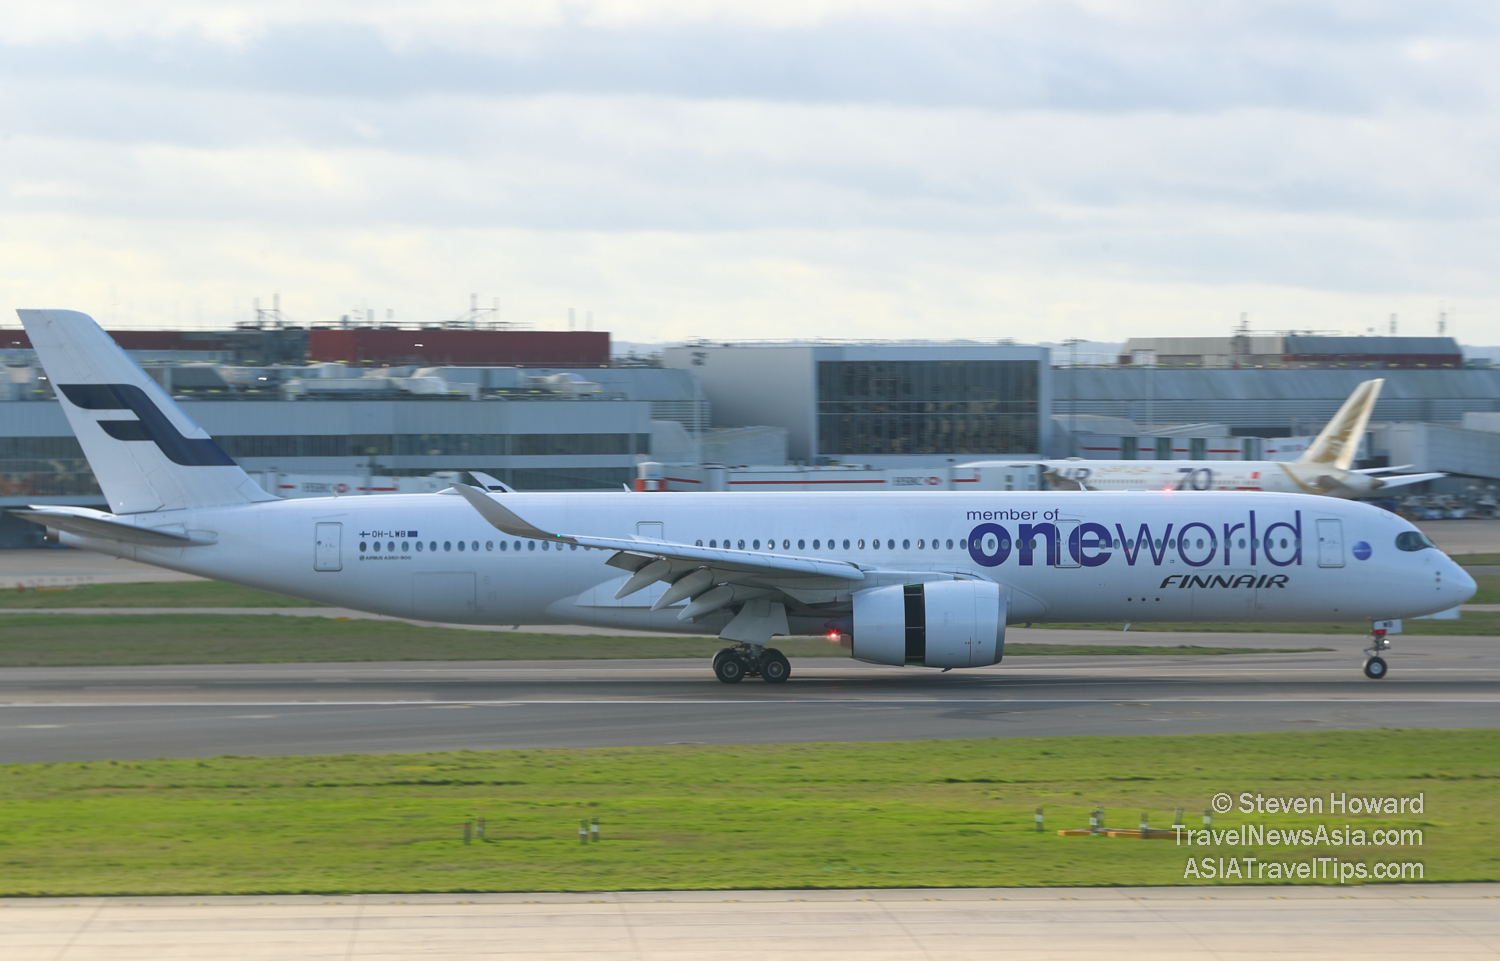 Finnair A350-900 reg: OH-LWB at London Heathrow. Picture by Steven Howard of TravelNewsAsia.com Click to enlarge.